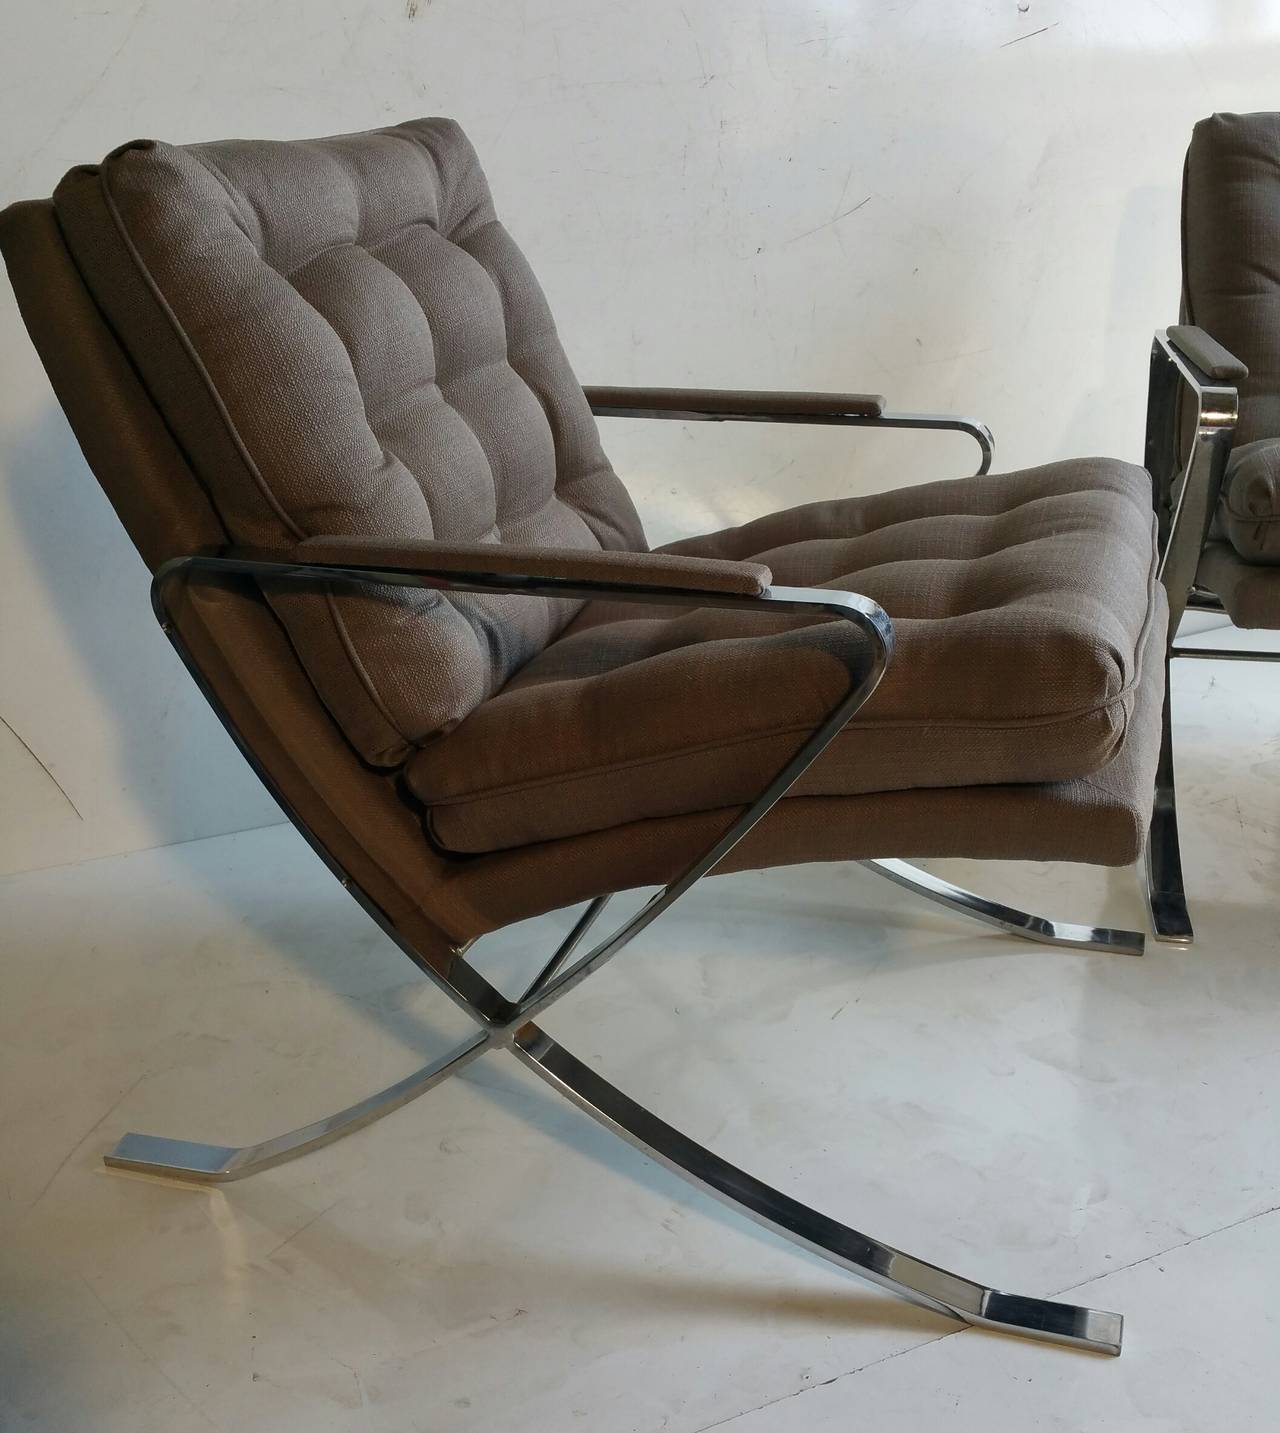 Pair of 1970s Flat Steel Chrome Lounge Chairs, Milo Baughman Inspired In Good Condition For Sale In Buffalo, NY